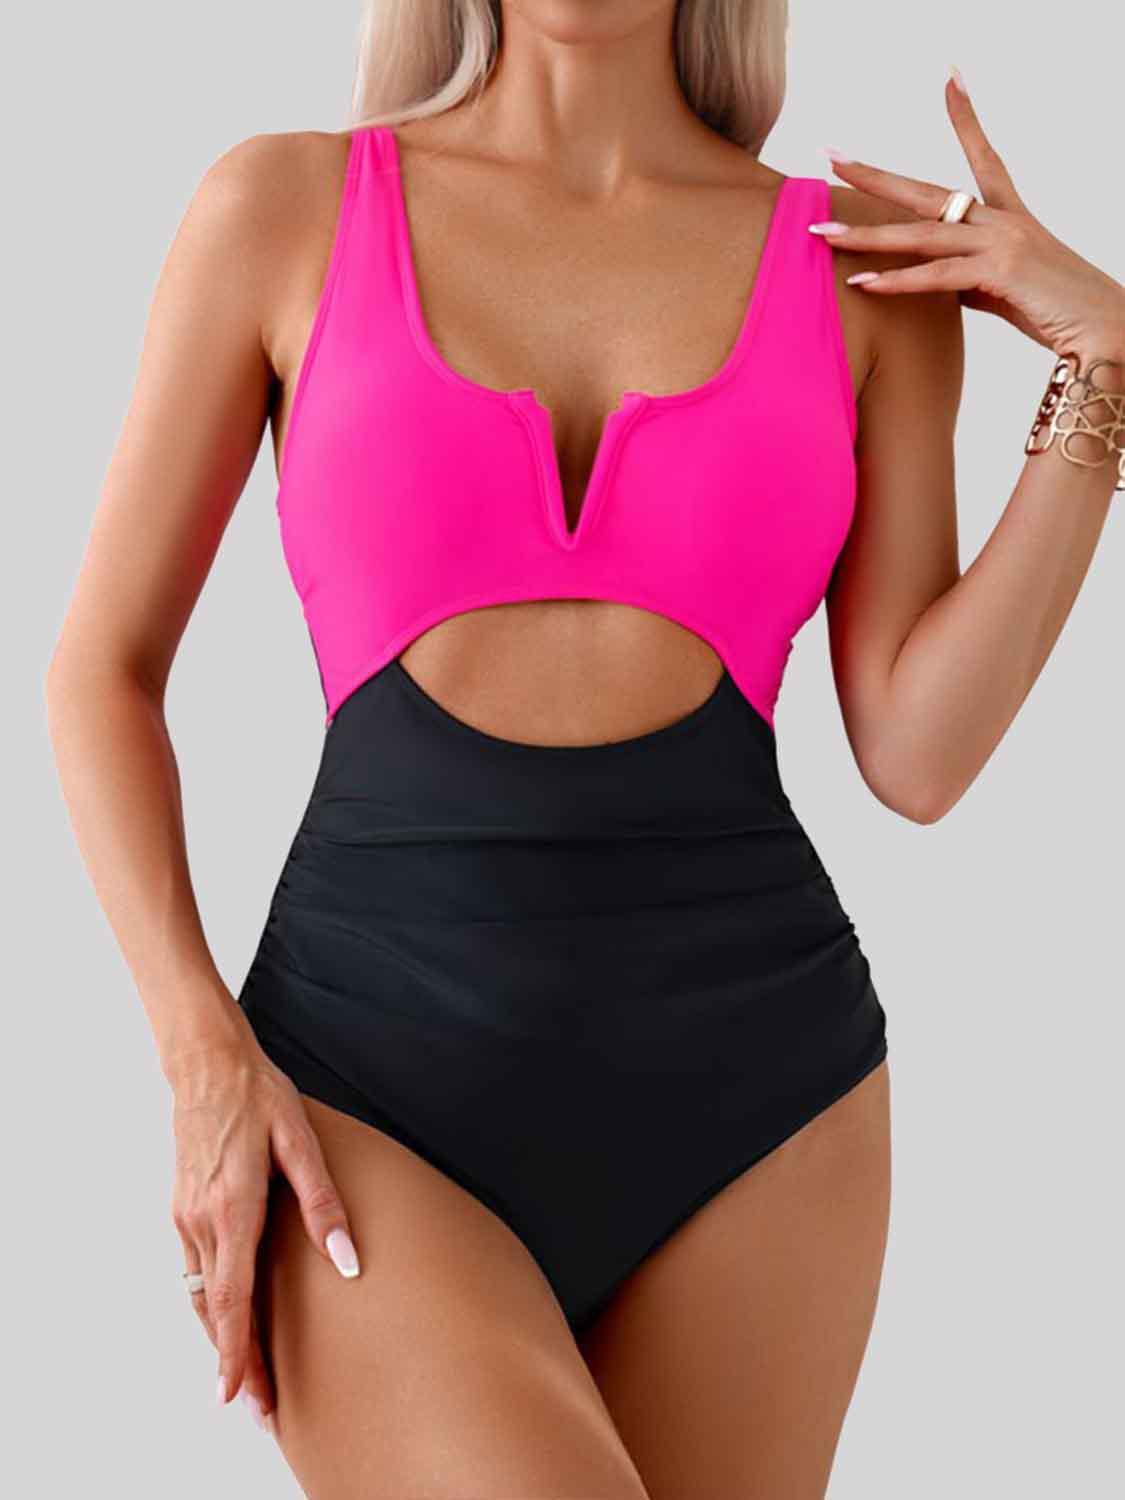 a woman in a pink and black one piece swimsuit